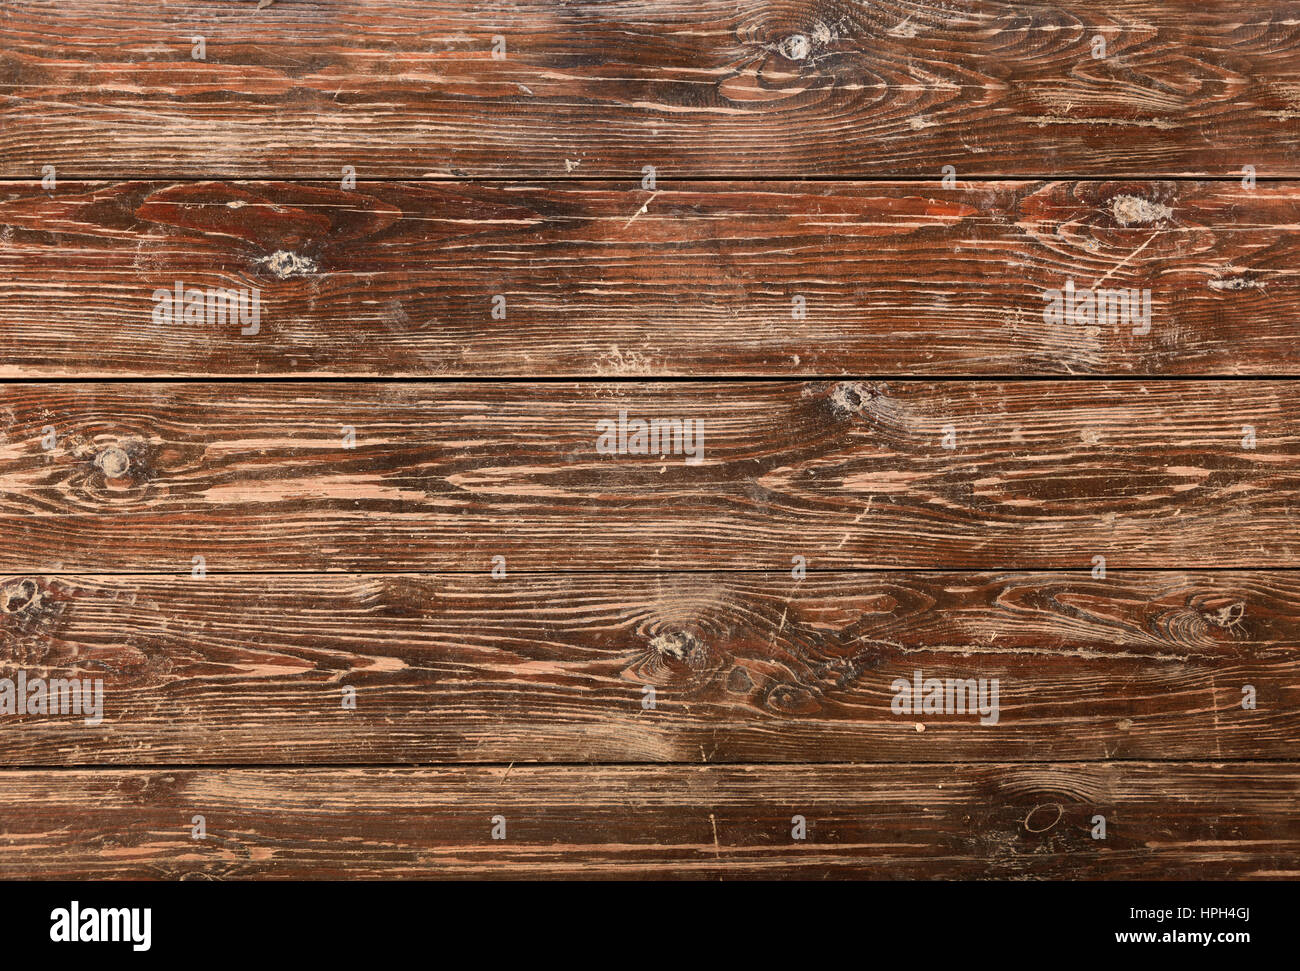 brown old wood texture with knot. Rustic background Stock Photo